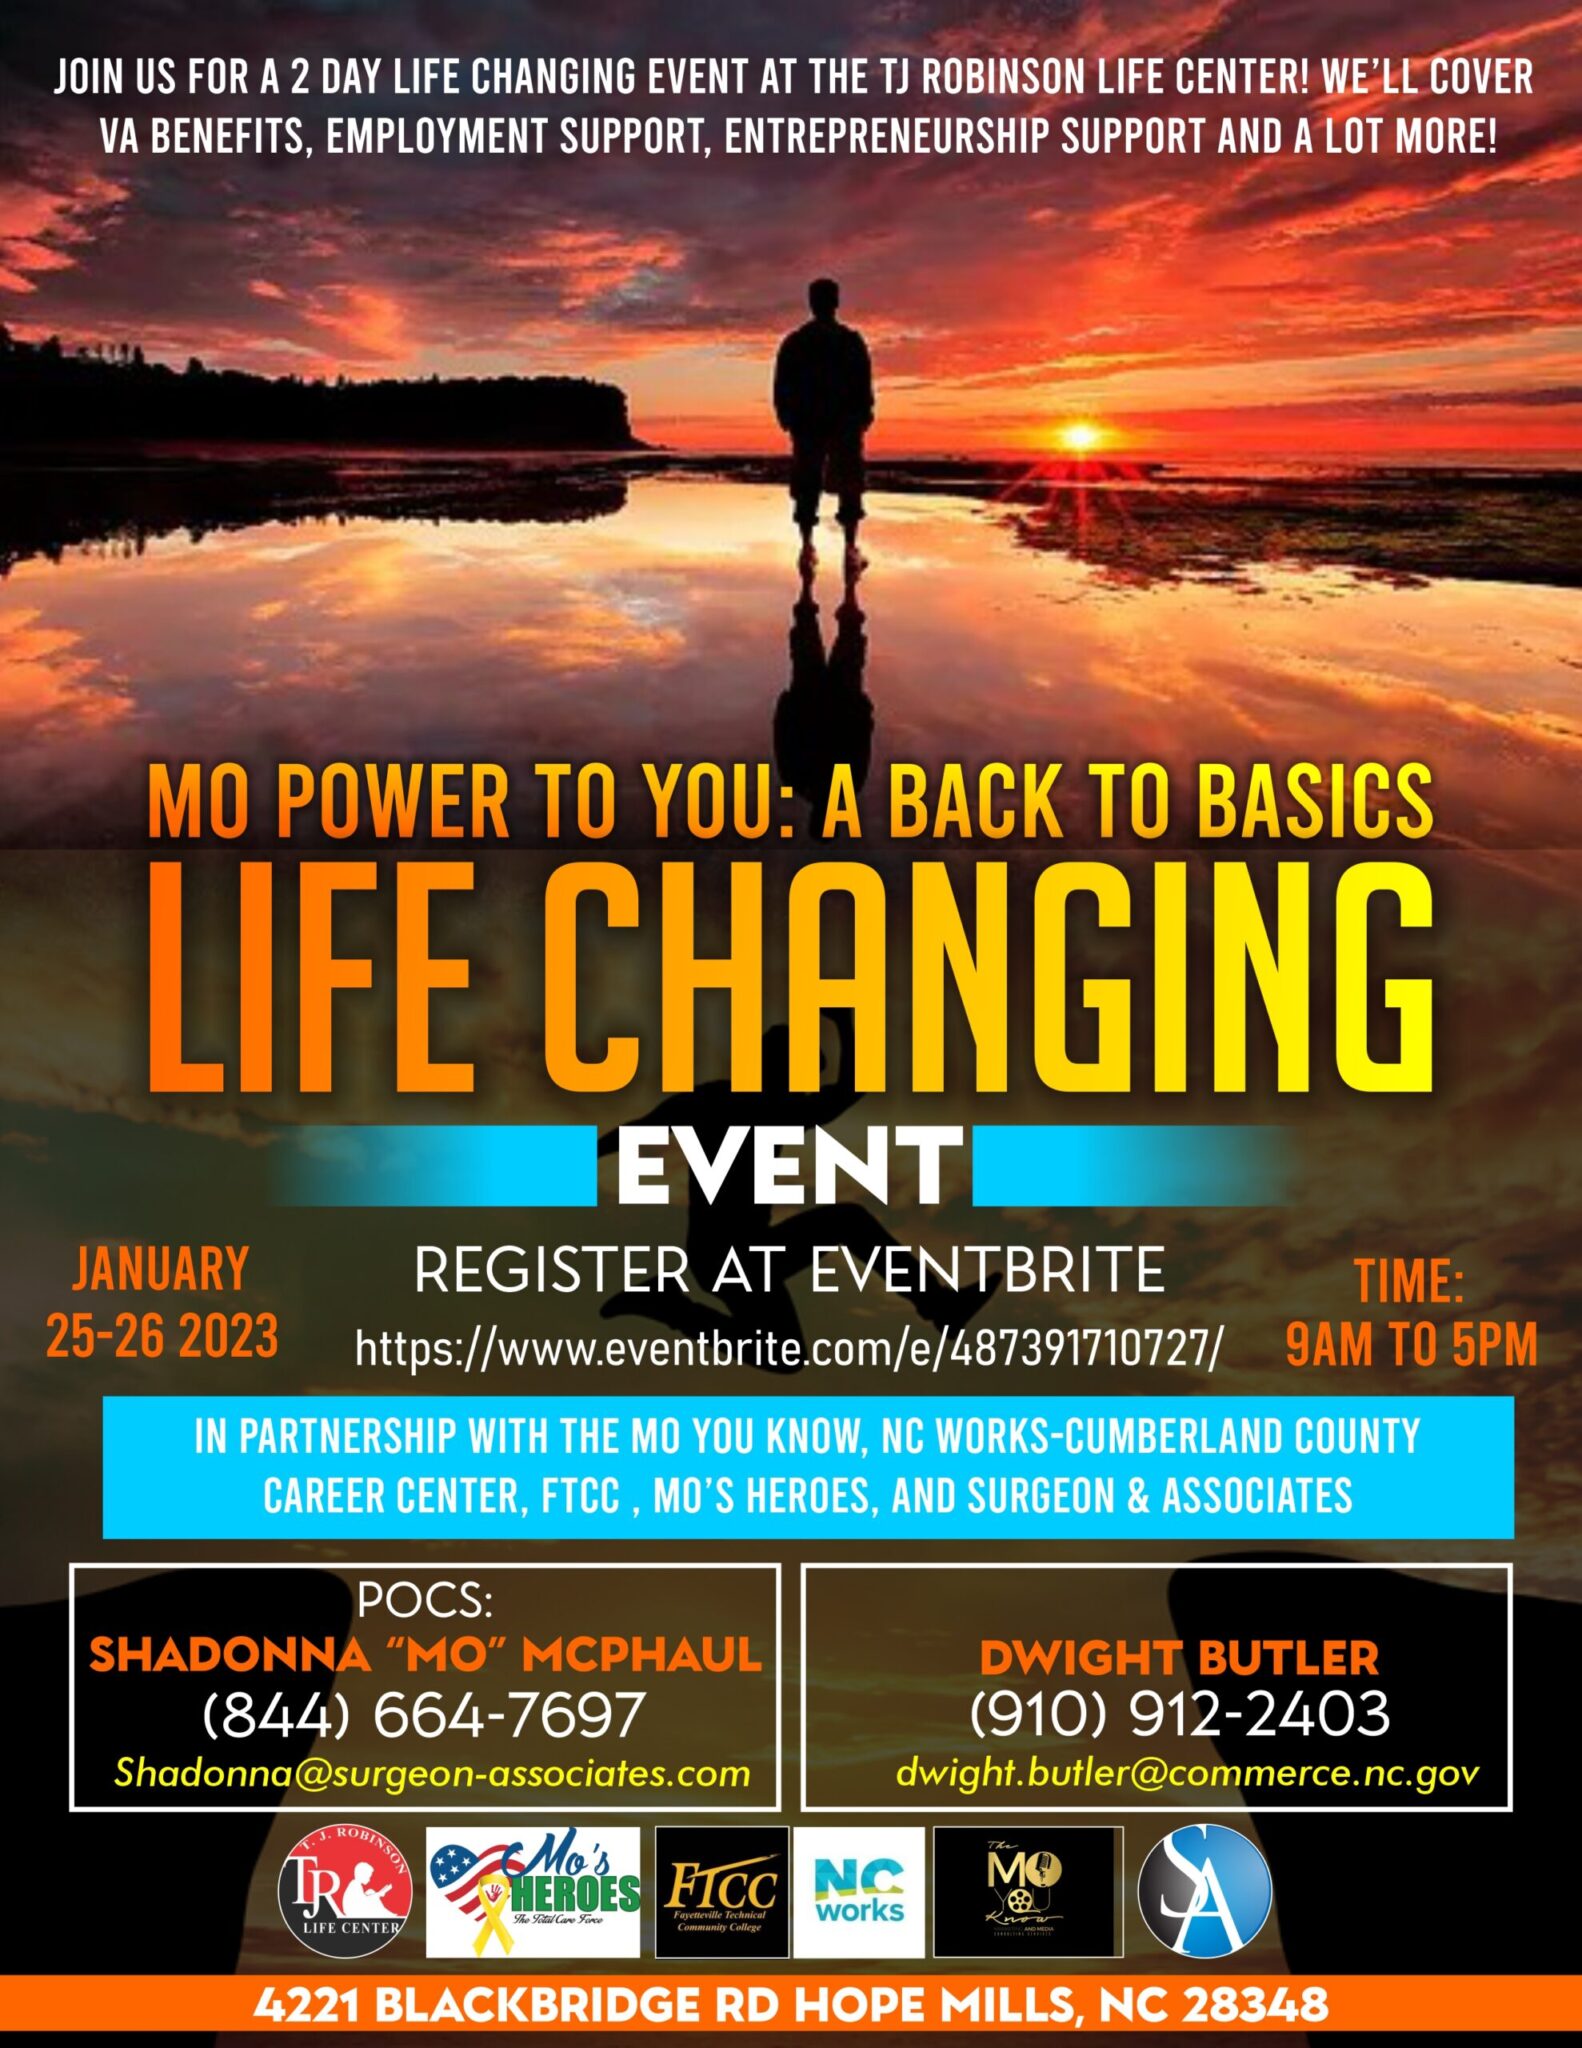 Over 100 Employers and 500 job seekers to take part Mo Power To You: Back to Basic A Life Changing Event